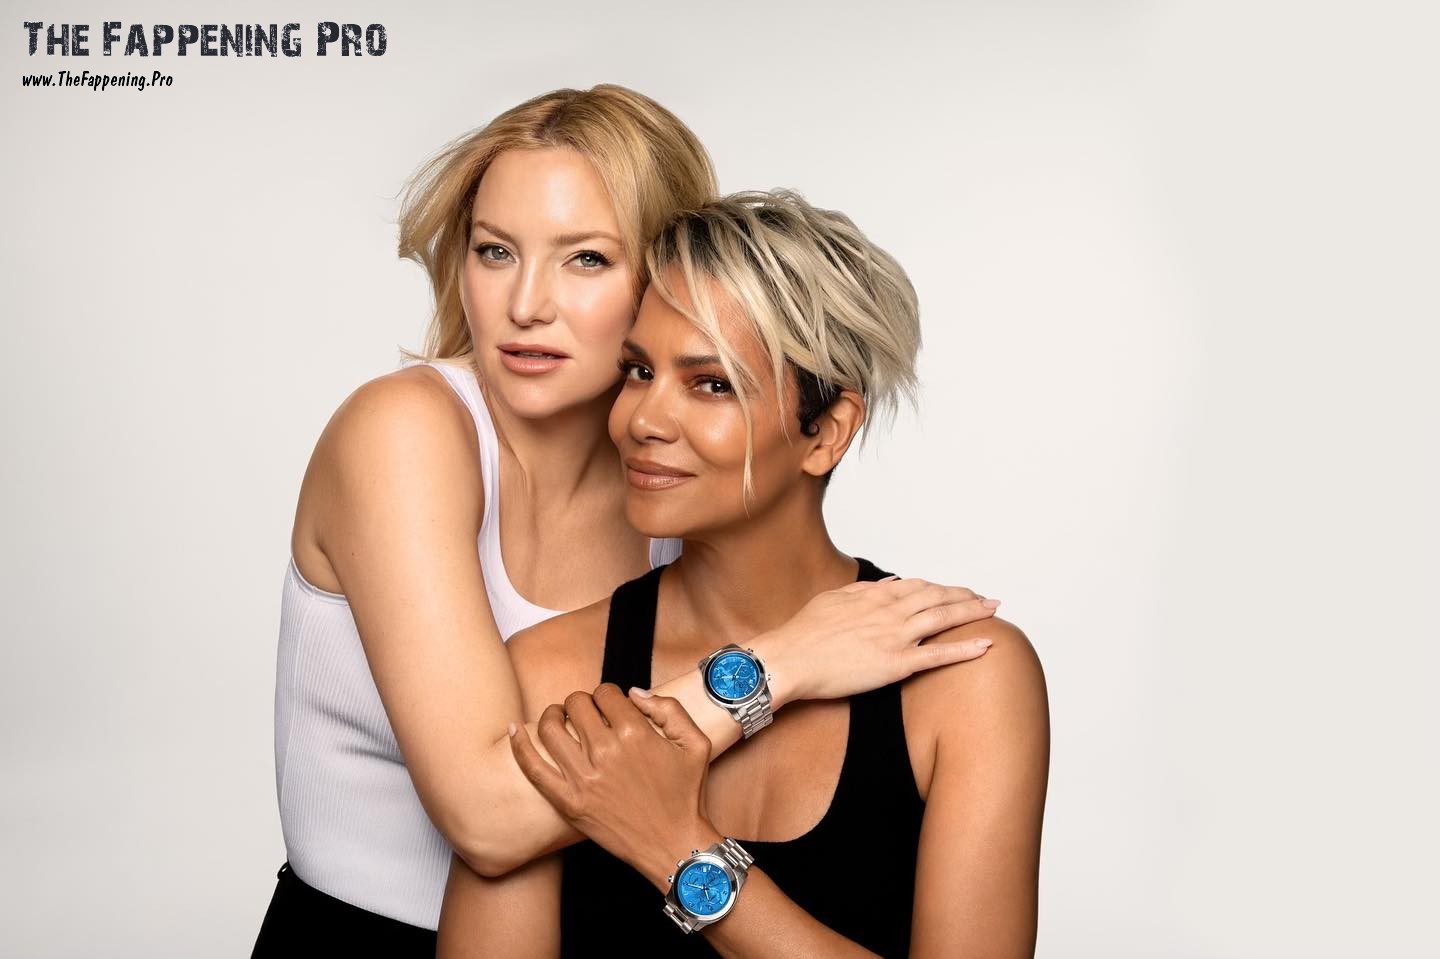 Get ready for a thrilling collaboration as Halle Berry and Kate Hudson team up for the Michael Kors #WatchHungerStop campaign. In a jaw-dropping photo shoot, the dynamic duo flaunted a stunning blue watch, with proceeds going towards a good cause. But what really stole the spotlight? Halle and Kate showing off their killer legs in tiny shorts. Check out the sizzling photoshoot that's for a cause and oozing with glamour!